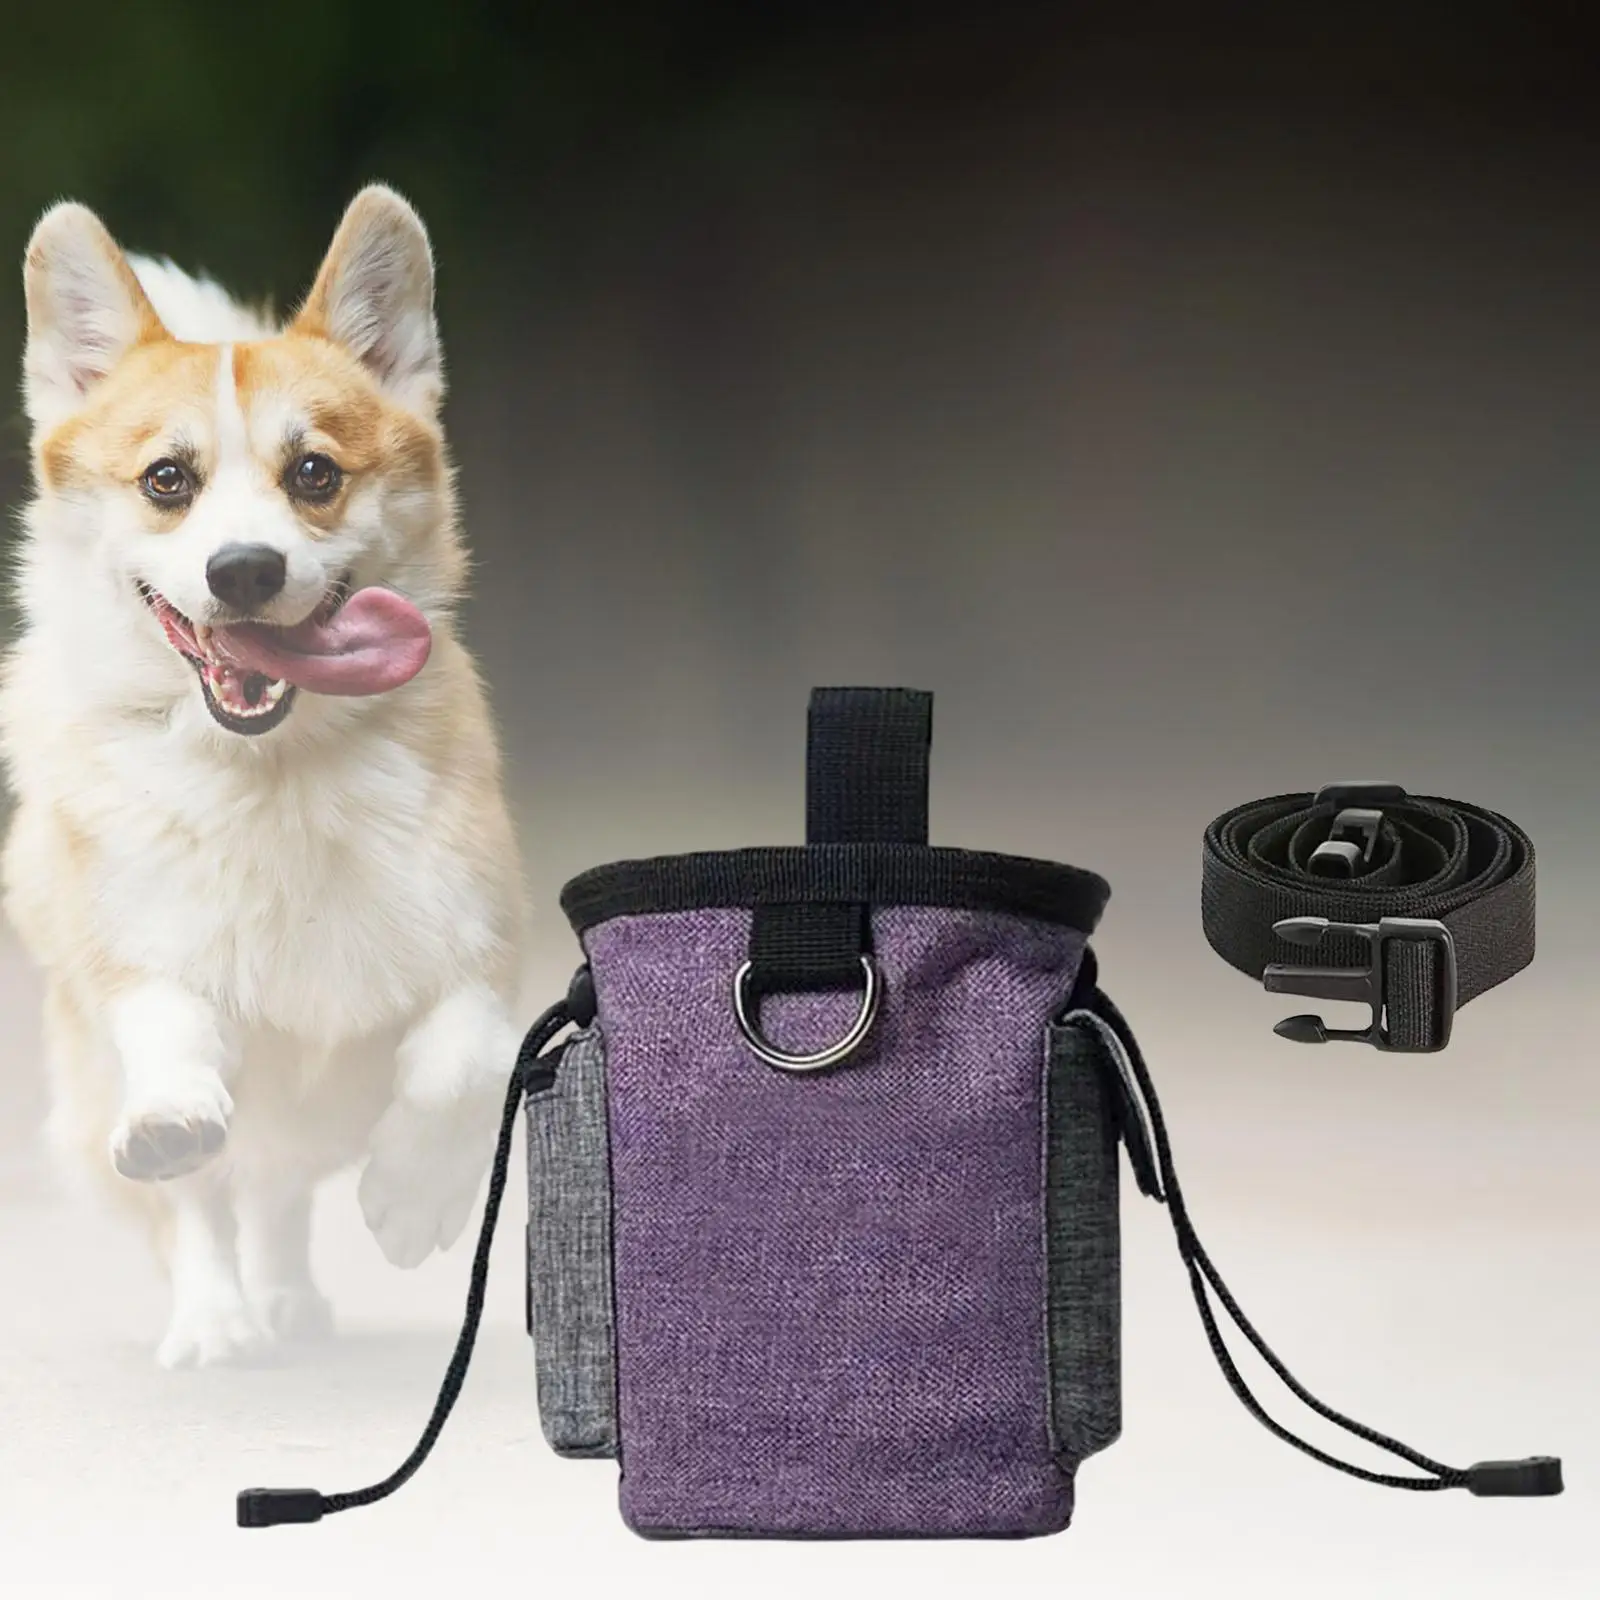 Treat Dog Pouch with Waist Shoulder Strap Fanny Pack Carrier Drawstring Dog Training Bag for Travel Walking Hiking Toys Pet